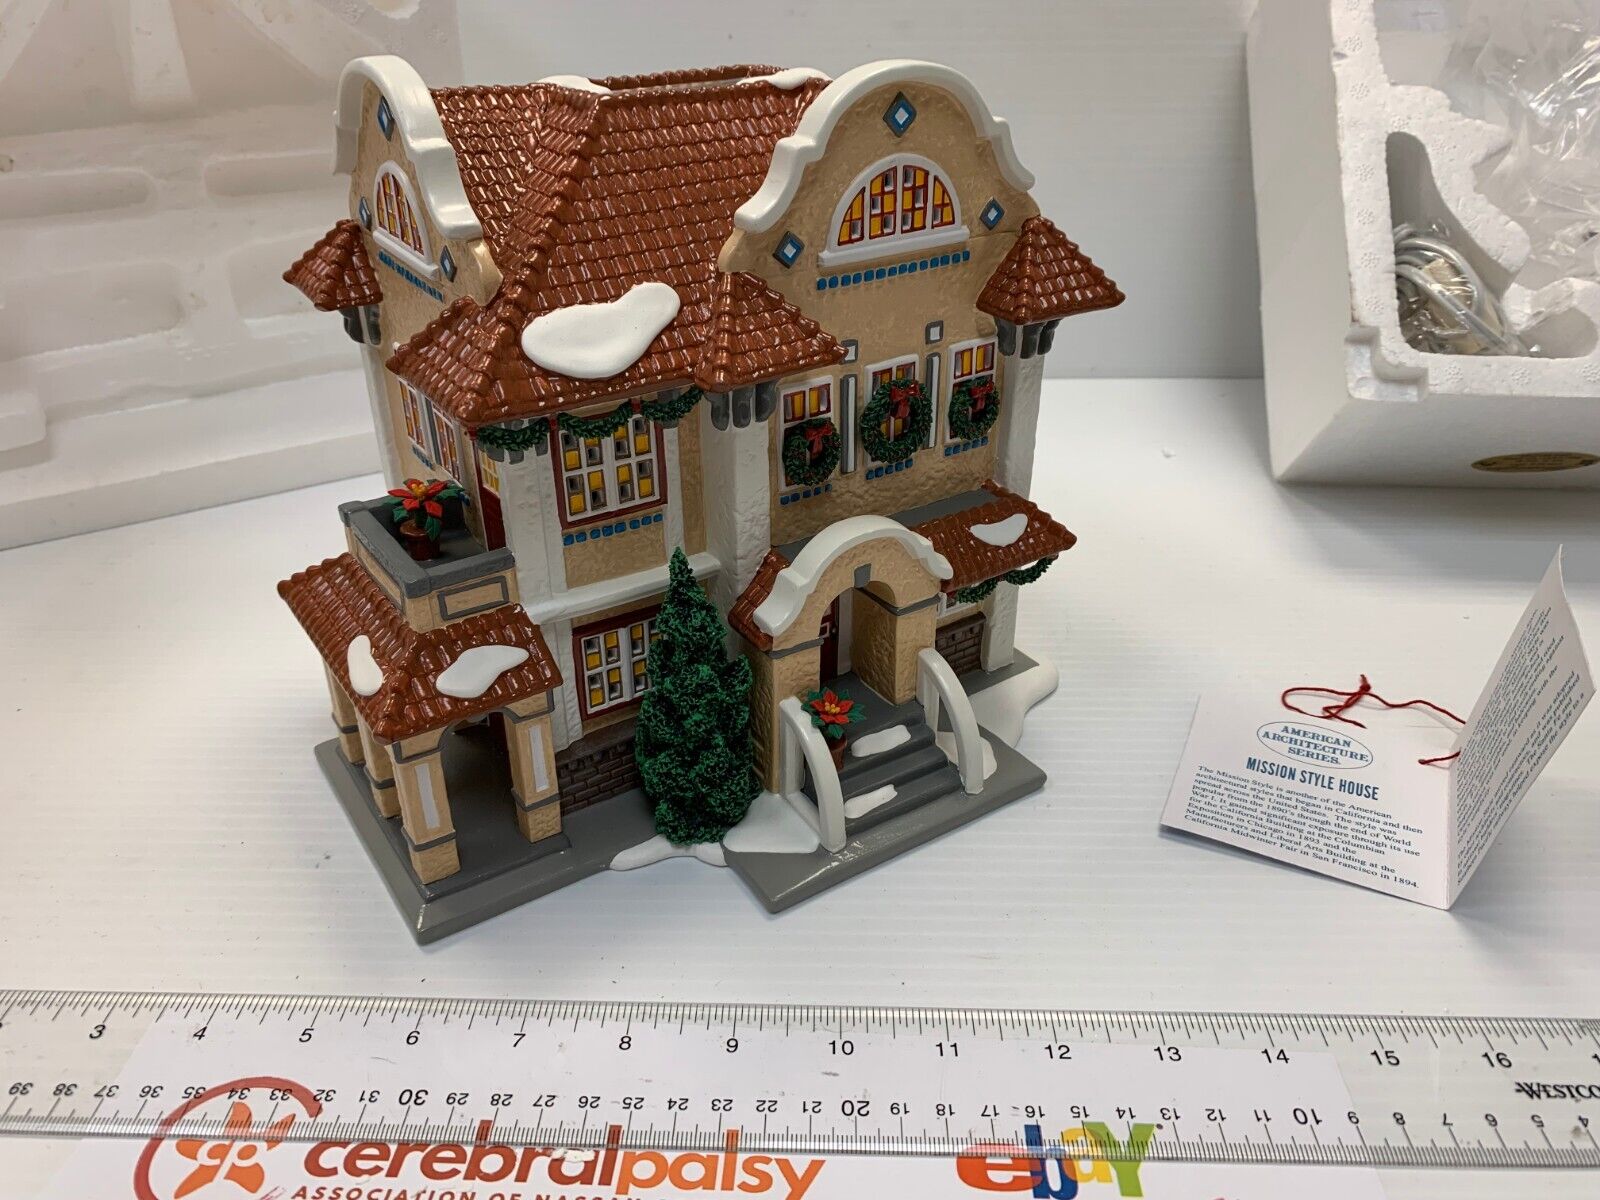 Dept 56 Snow Village Mission Style House #55332 from 2003